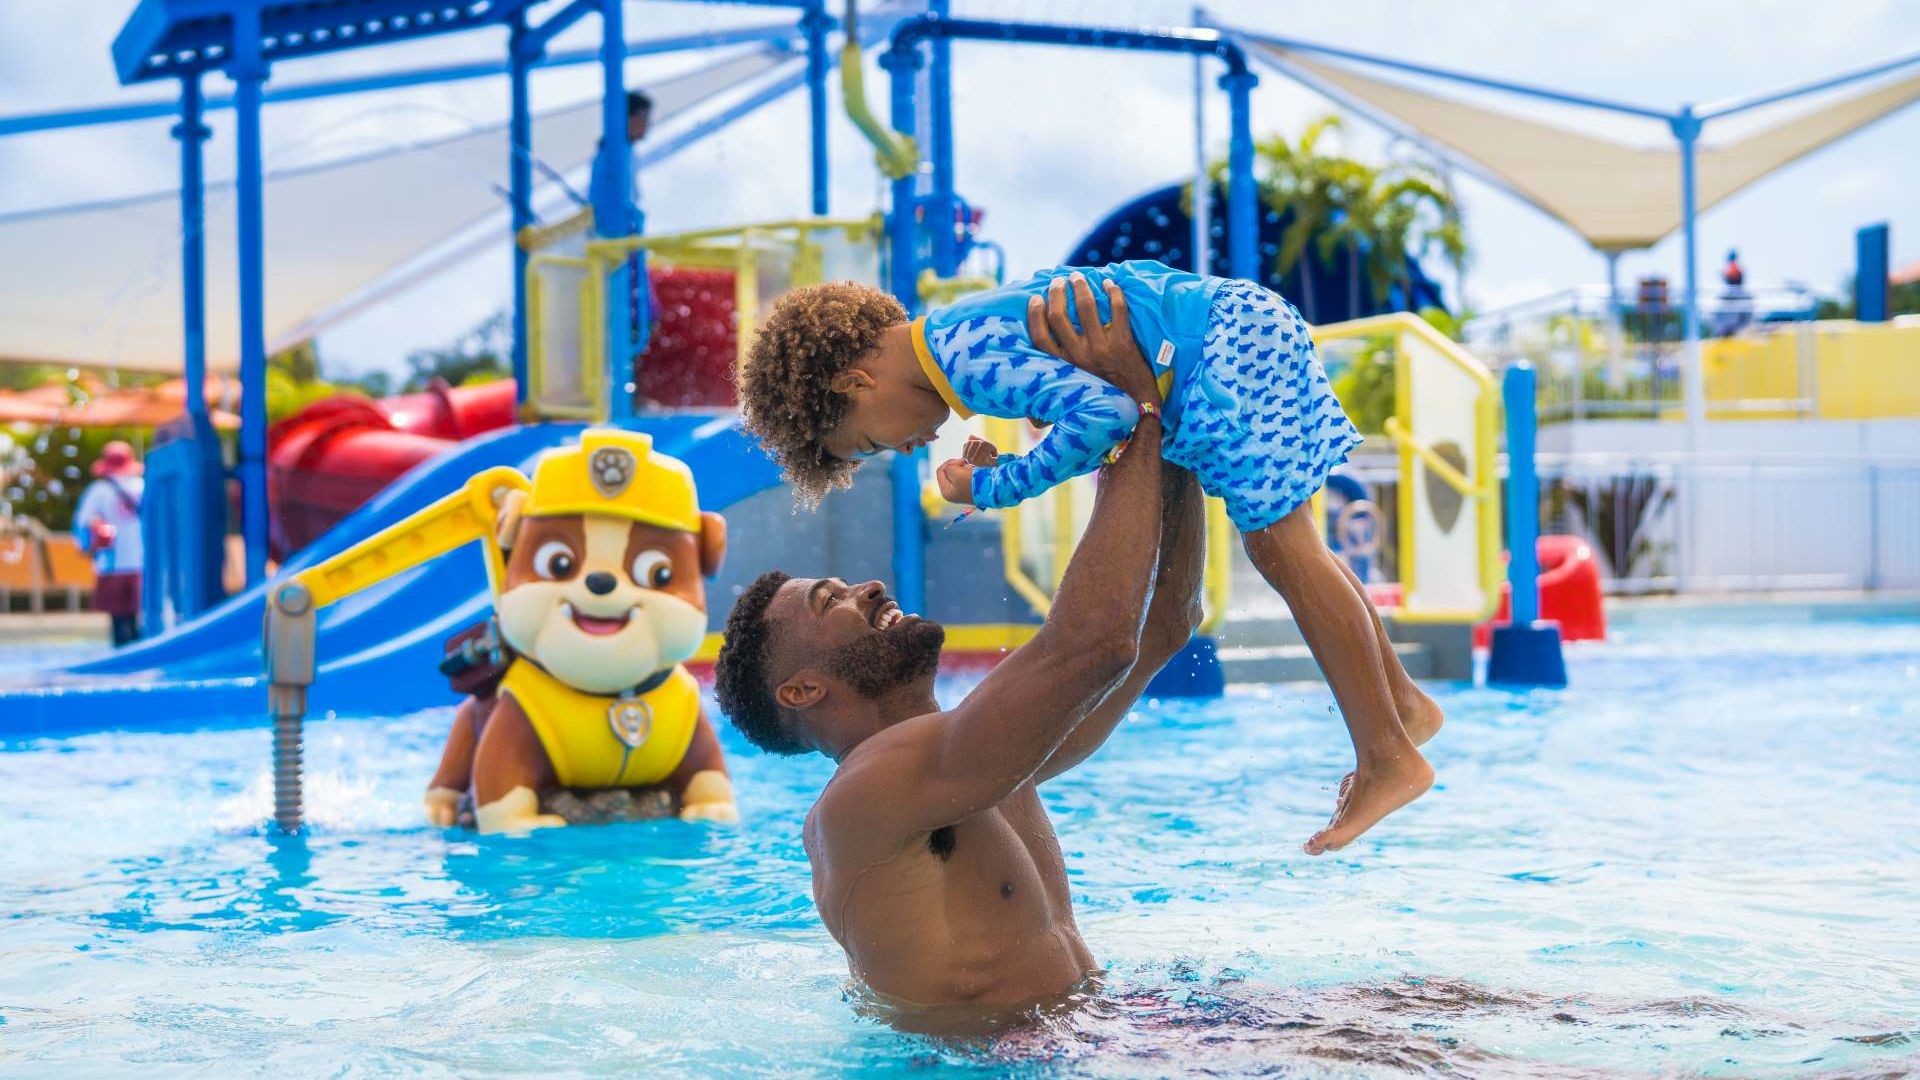 A Person And A Child In A Pool With A Toy In The Water